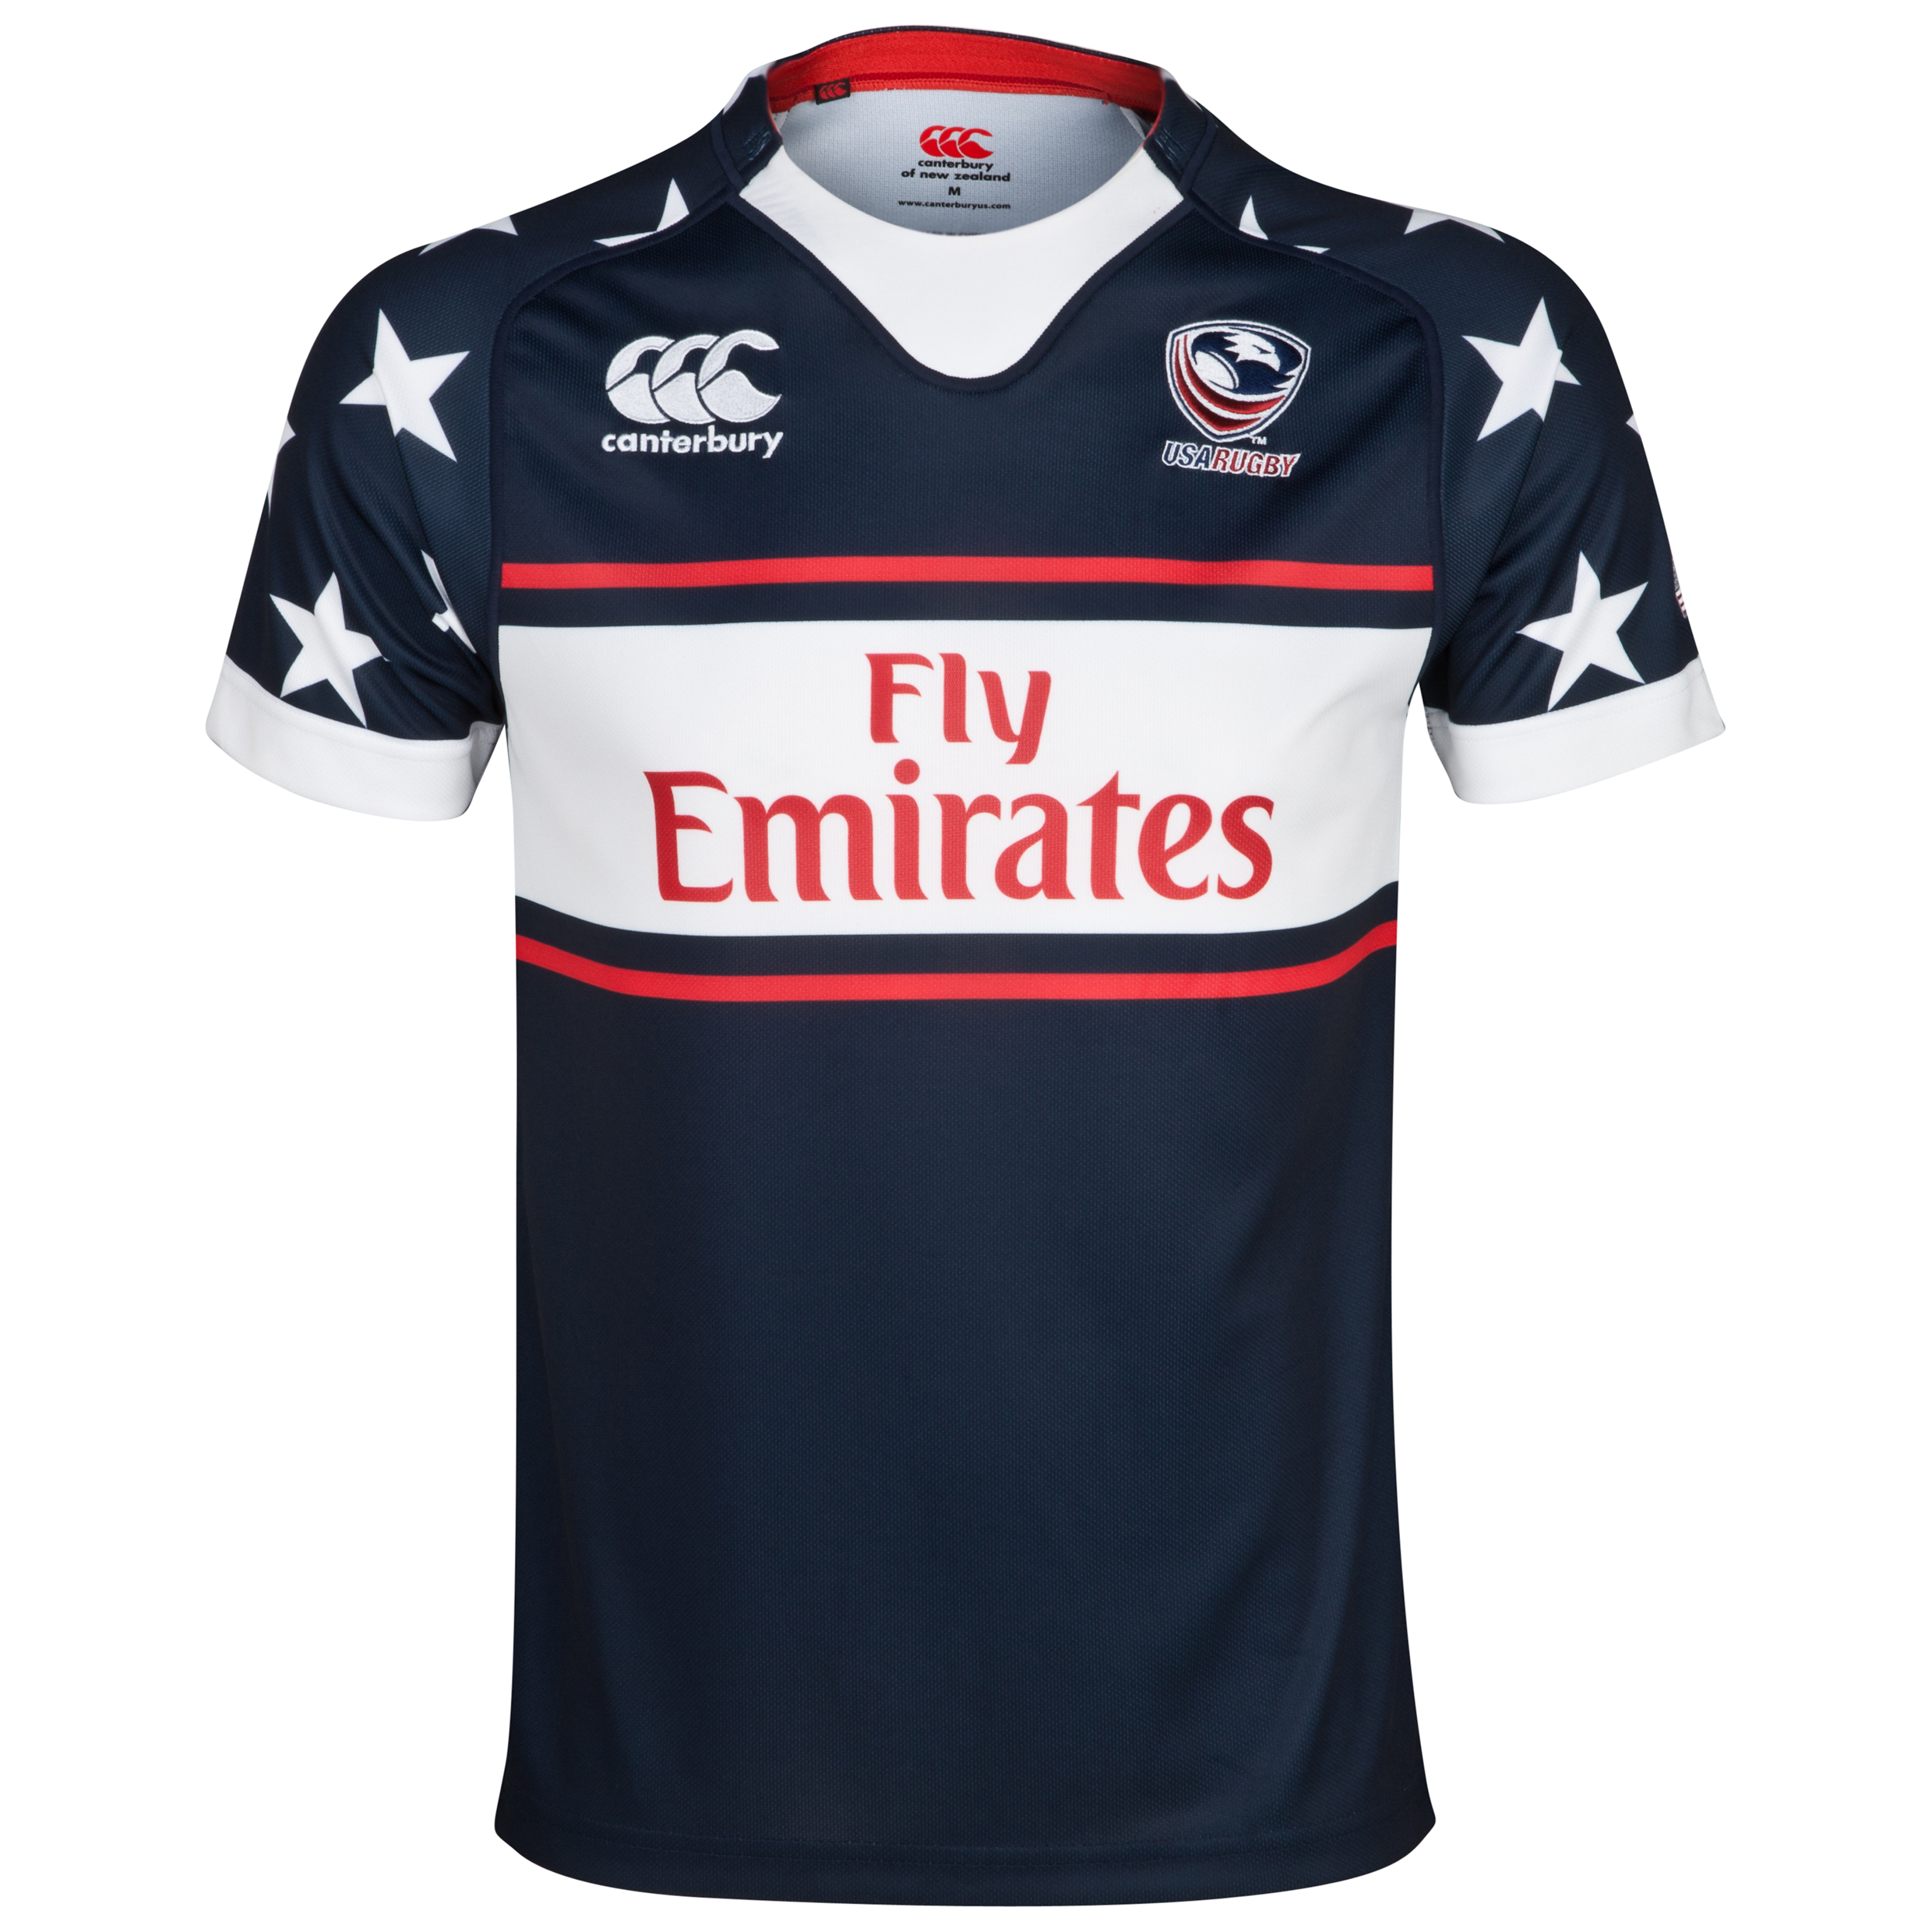 USA Eagles Alternate 7inchs Rugby Pro Shirt 2013/14